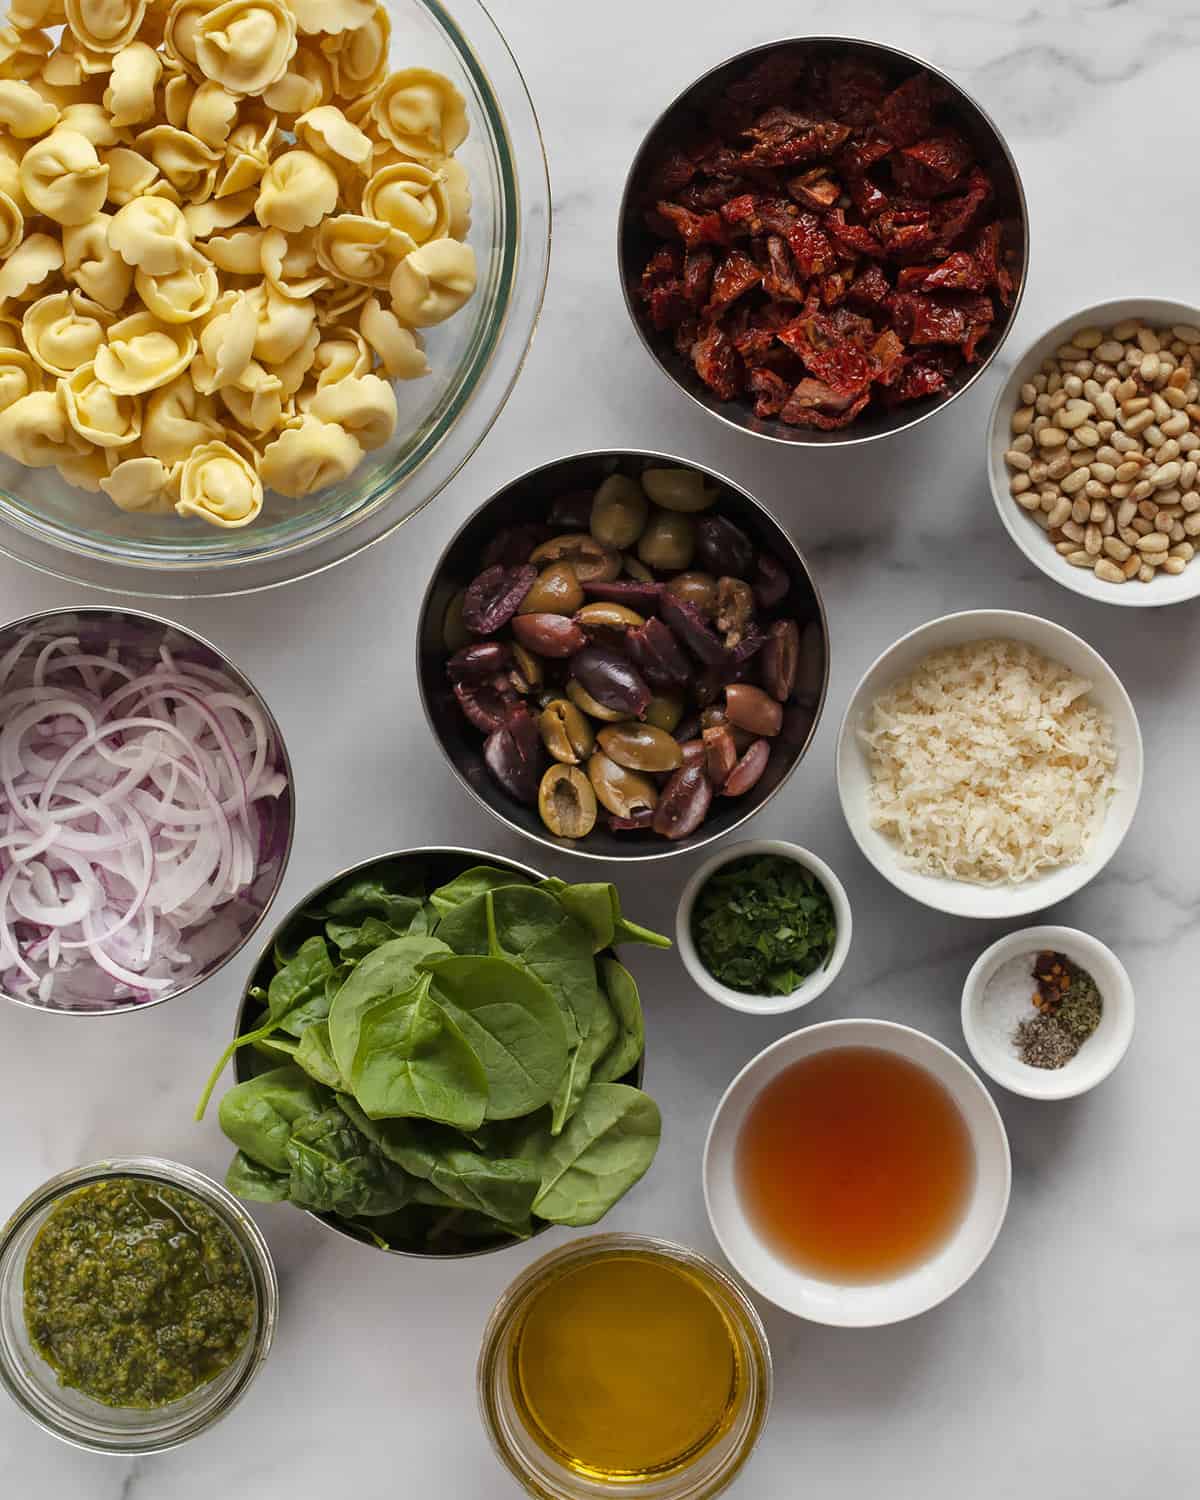 Ingredients including tortellini, sun dried tomatoes, olives, spinach, parmesan, red onions, pesto and pine nuts.